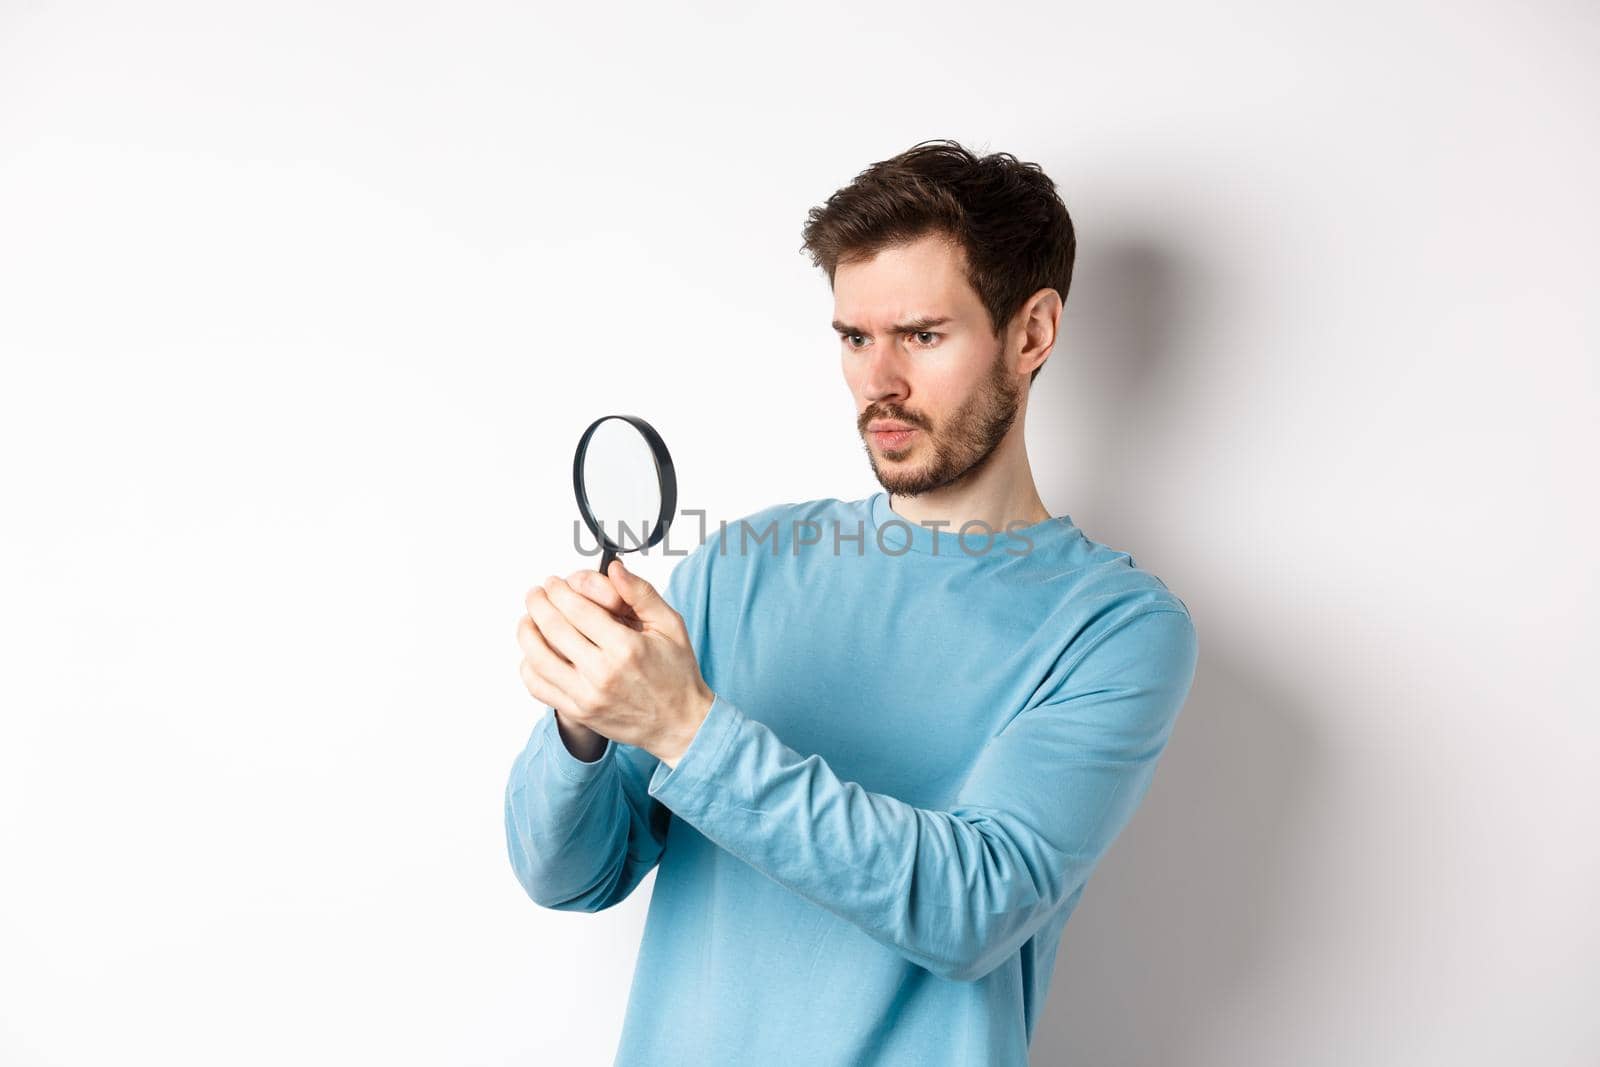 Serious-looking man looking through magnifying glass, investigating something, found interesting promo, standing on white background.